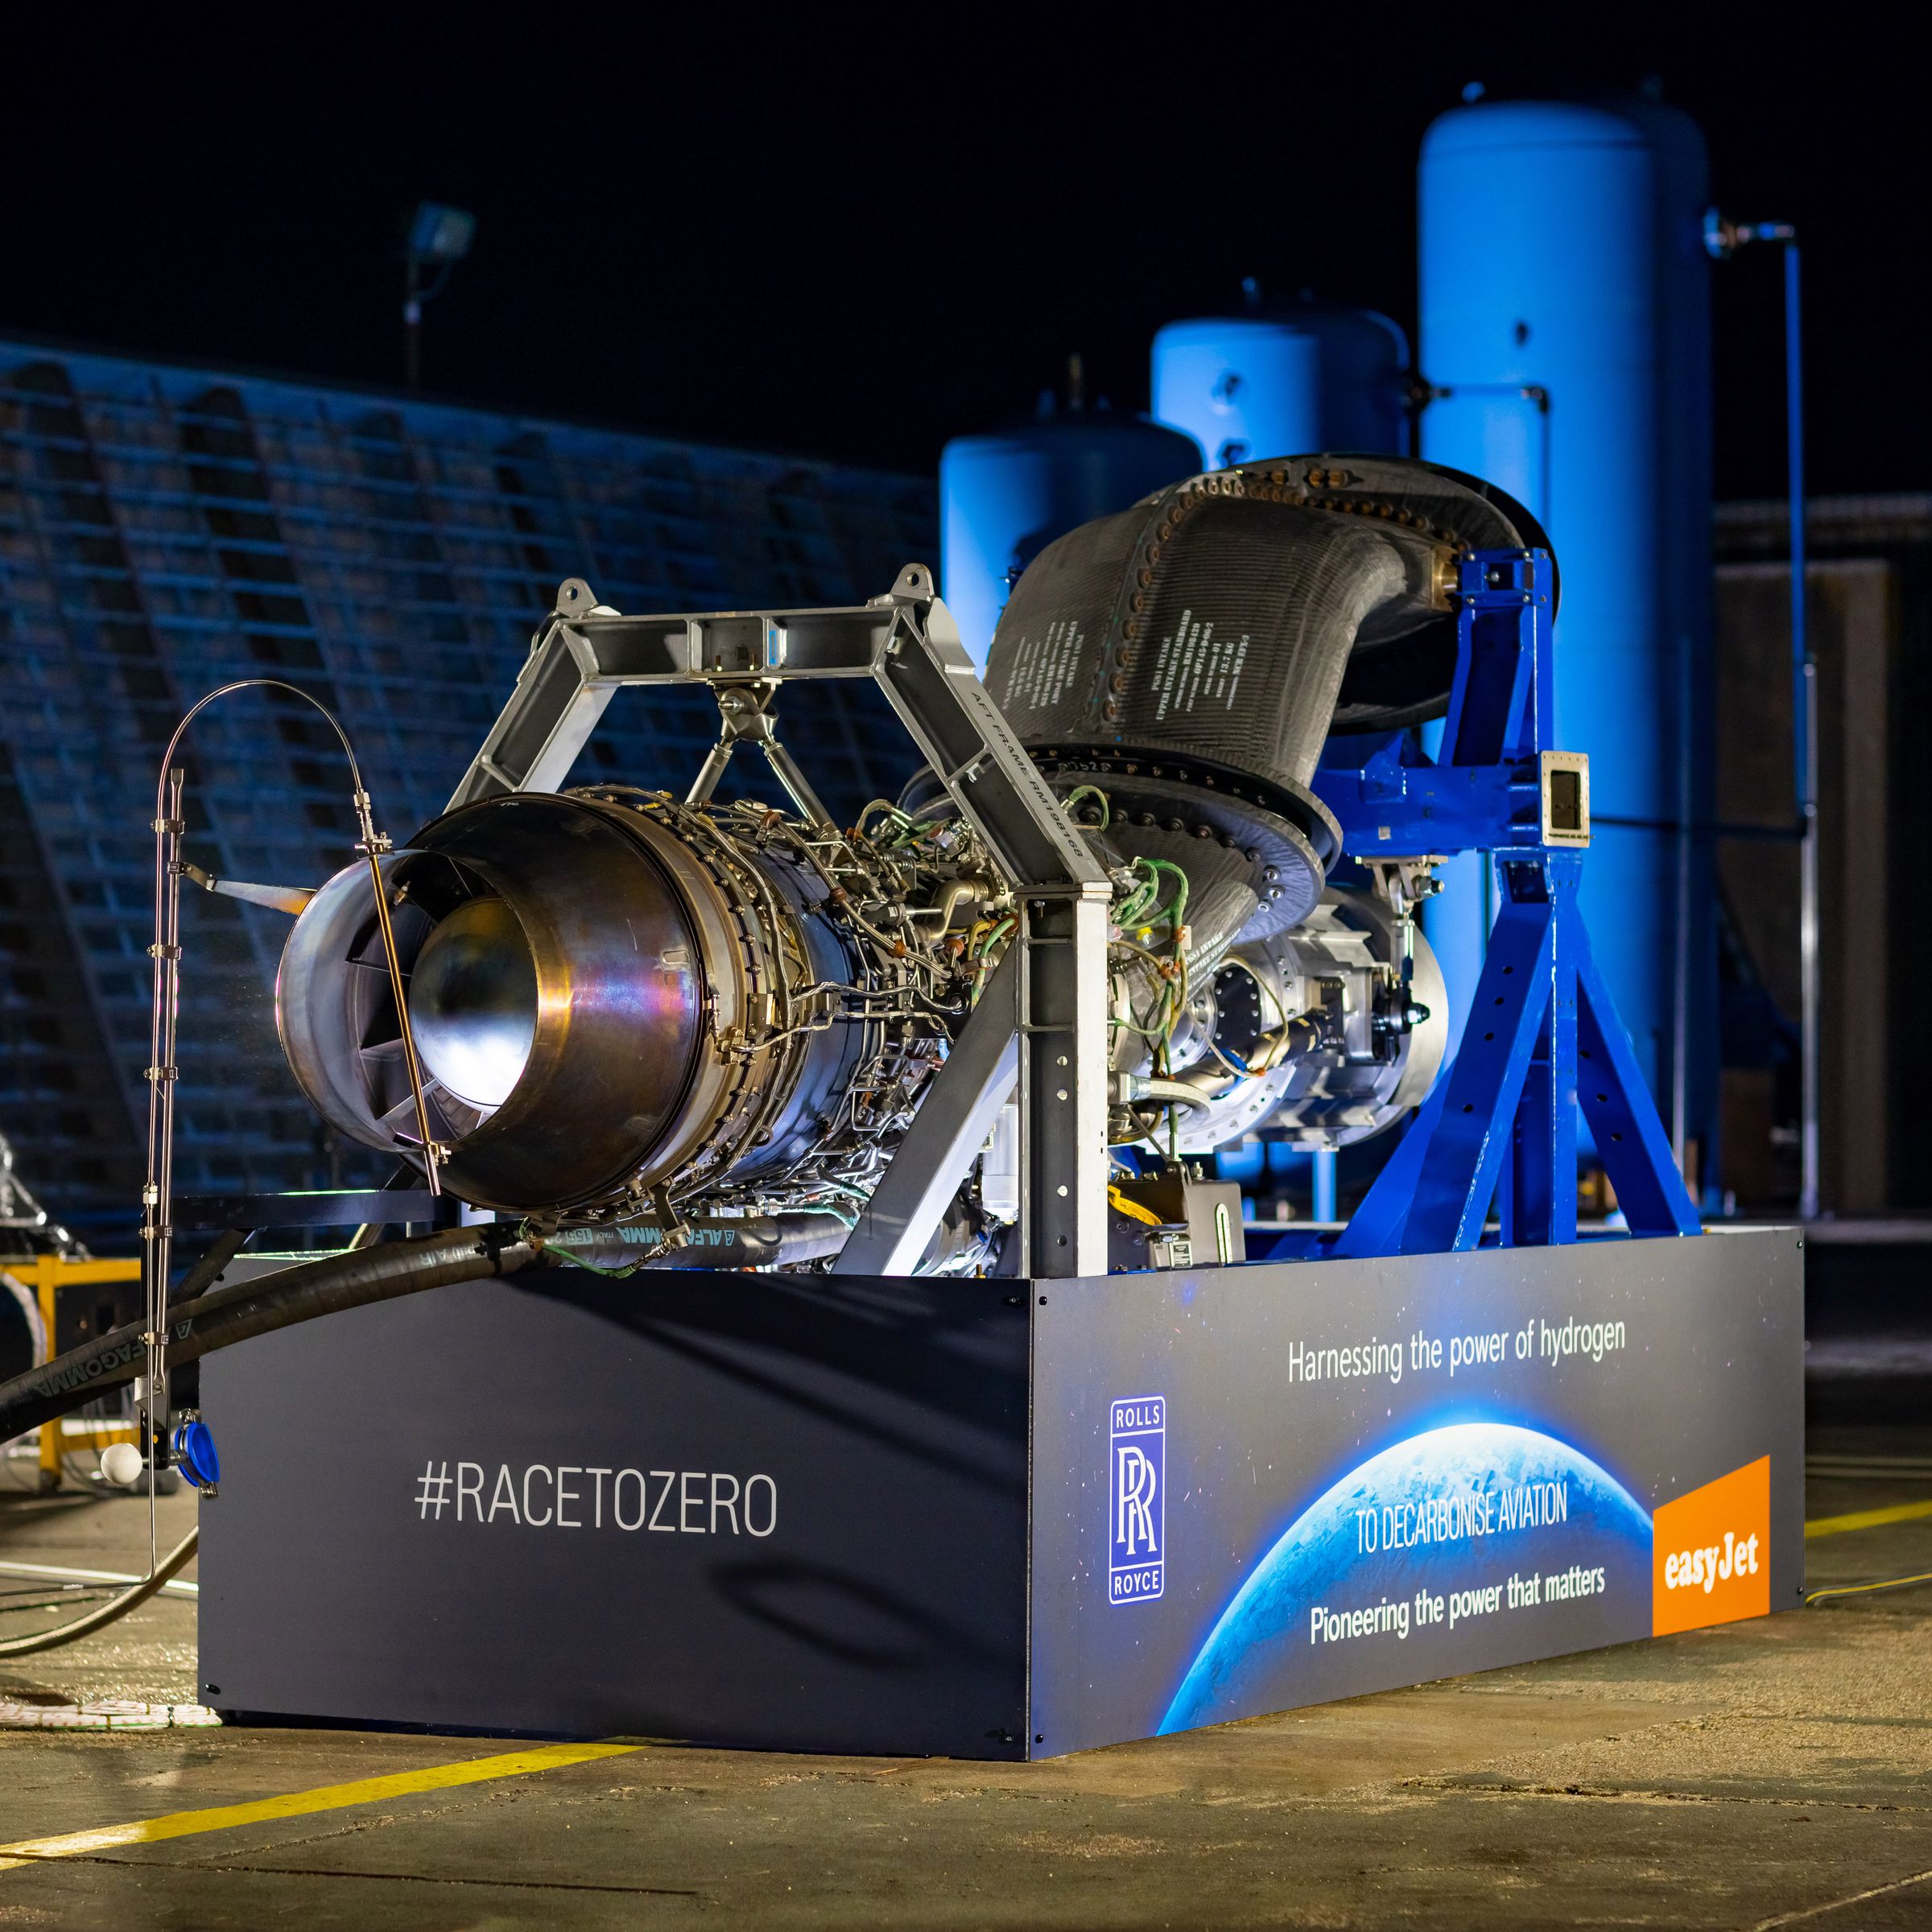 A converted aircraft engine seen at night